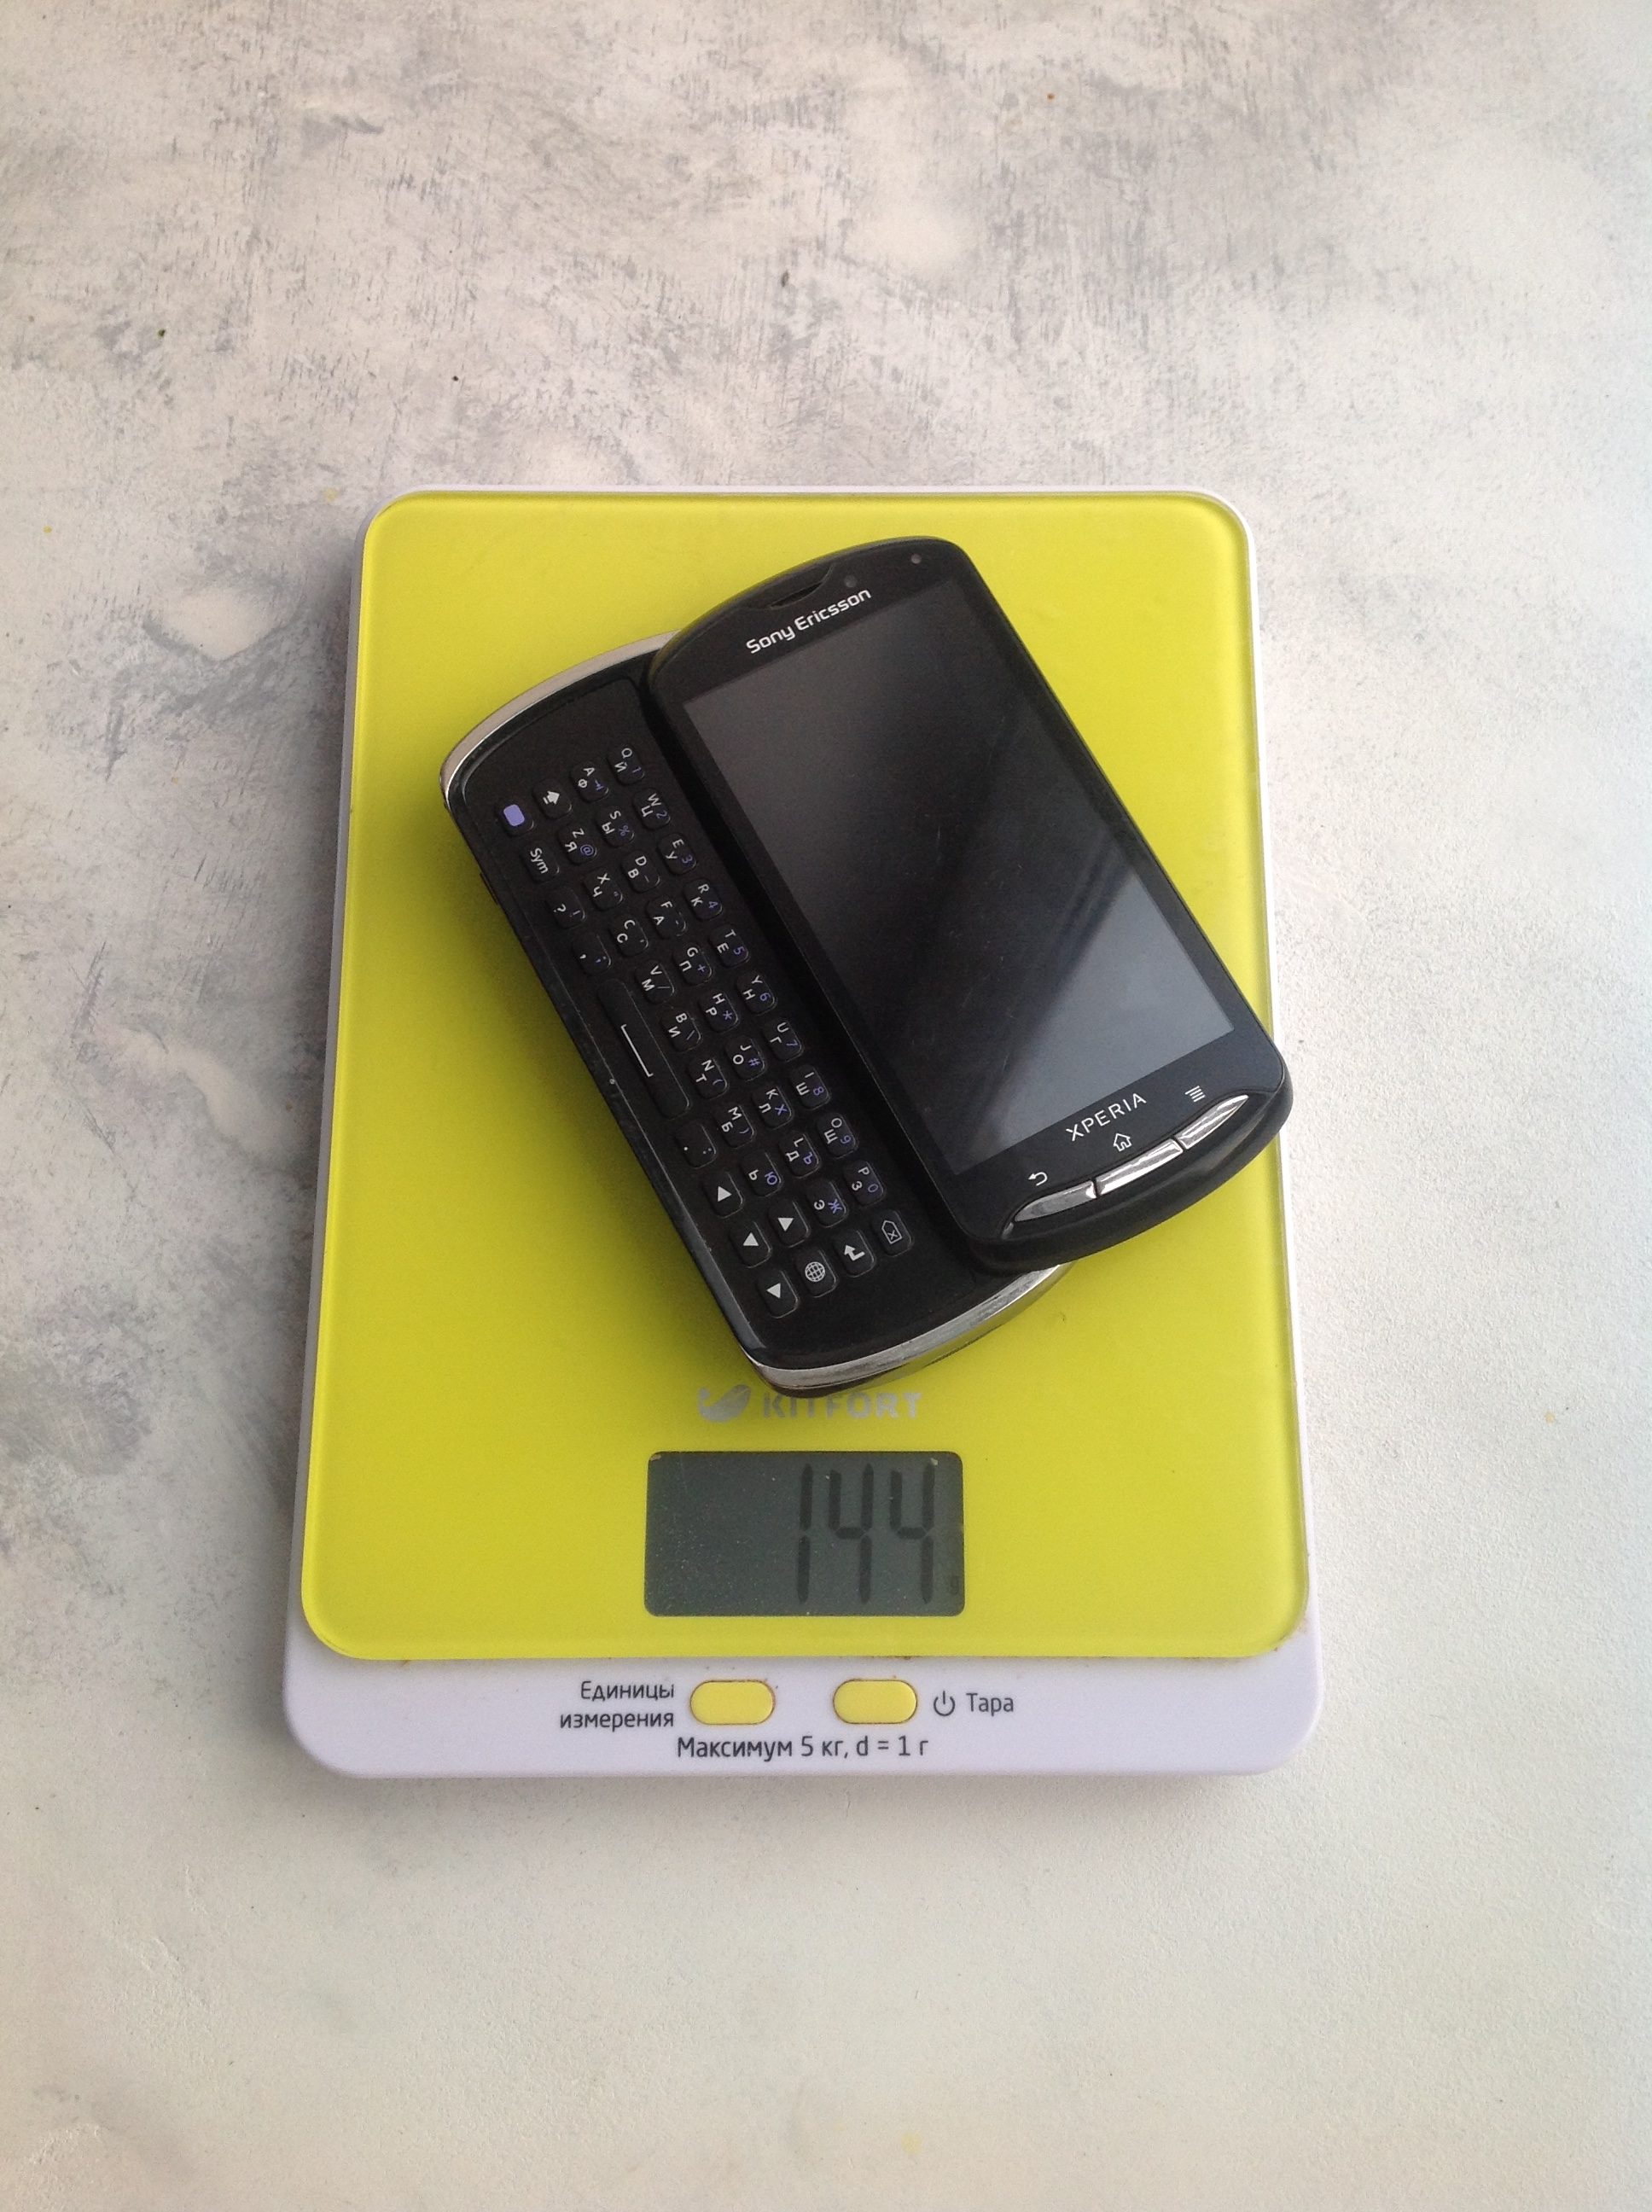 the weight of the sony ericsson qwerty slider smartphone